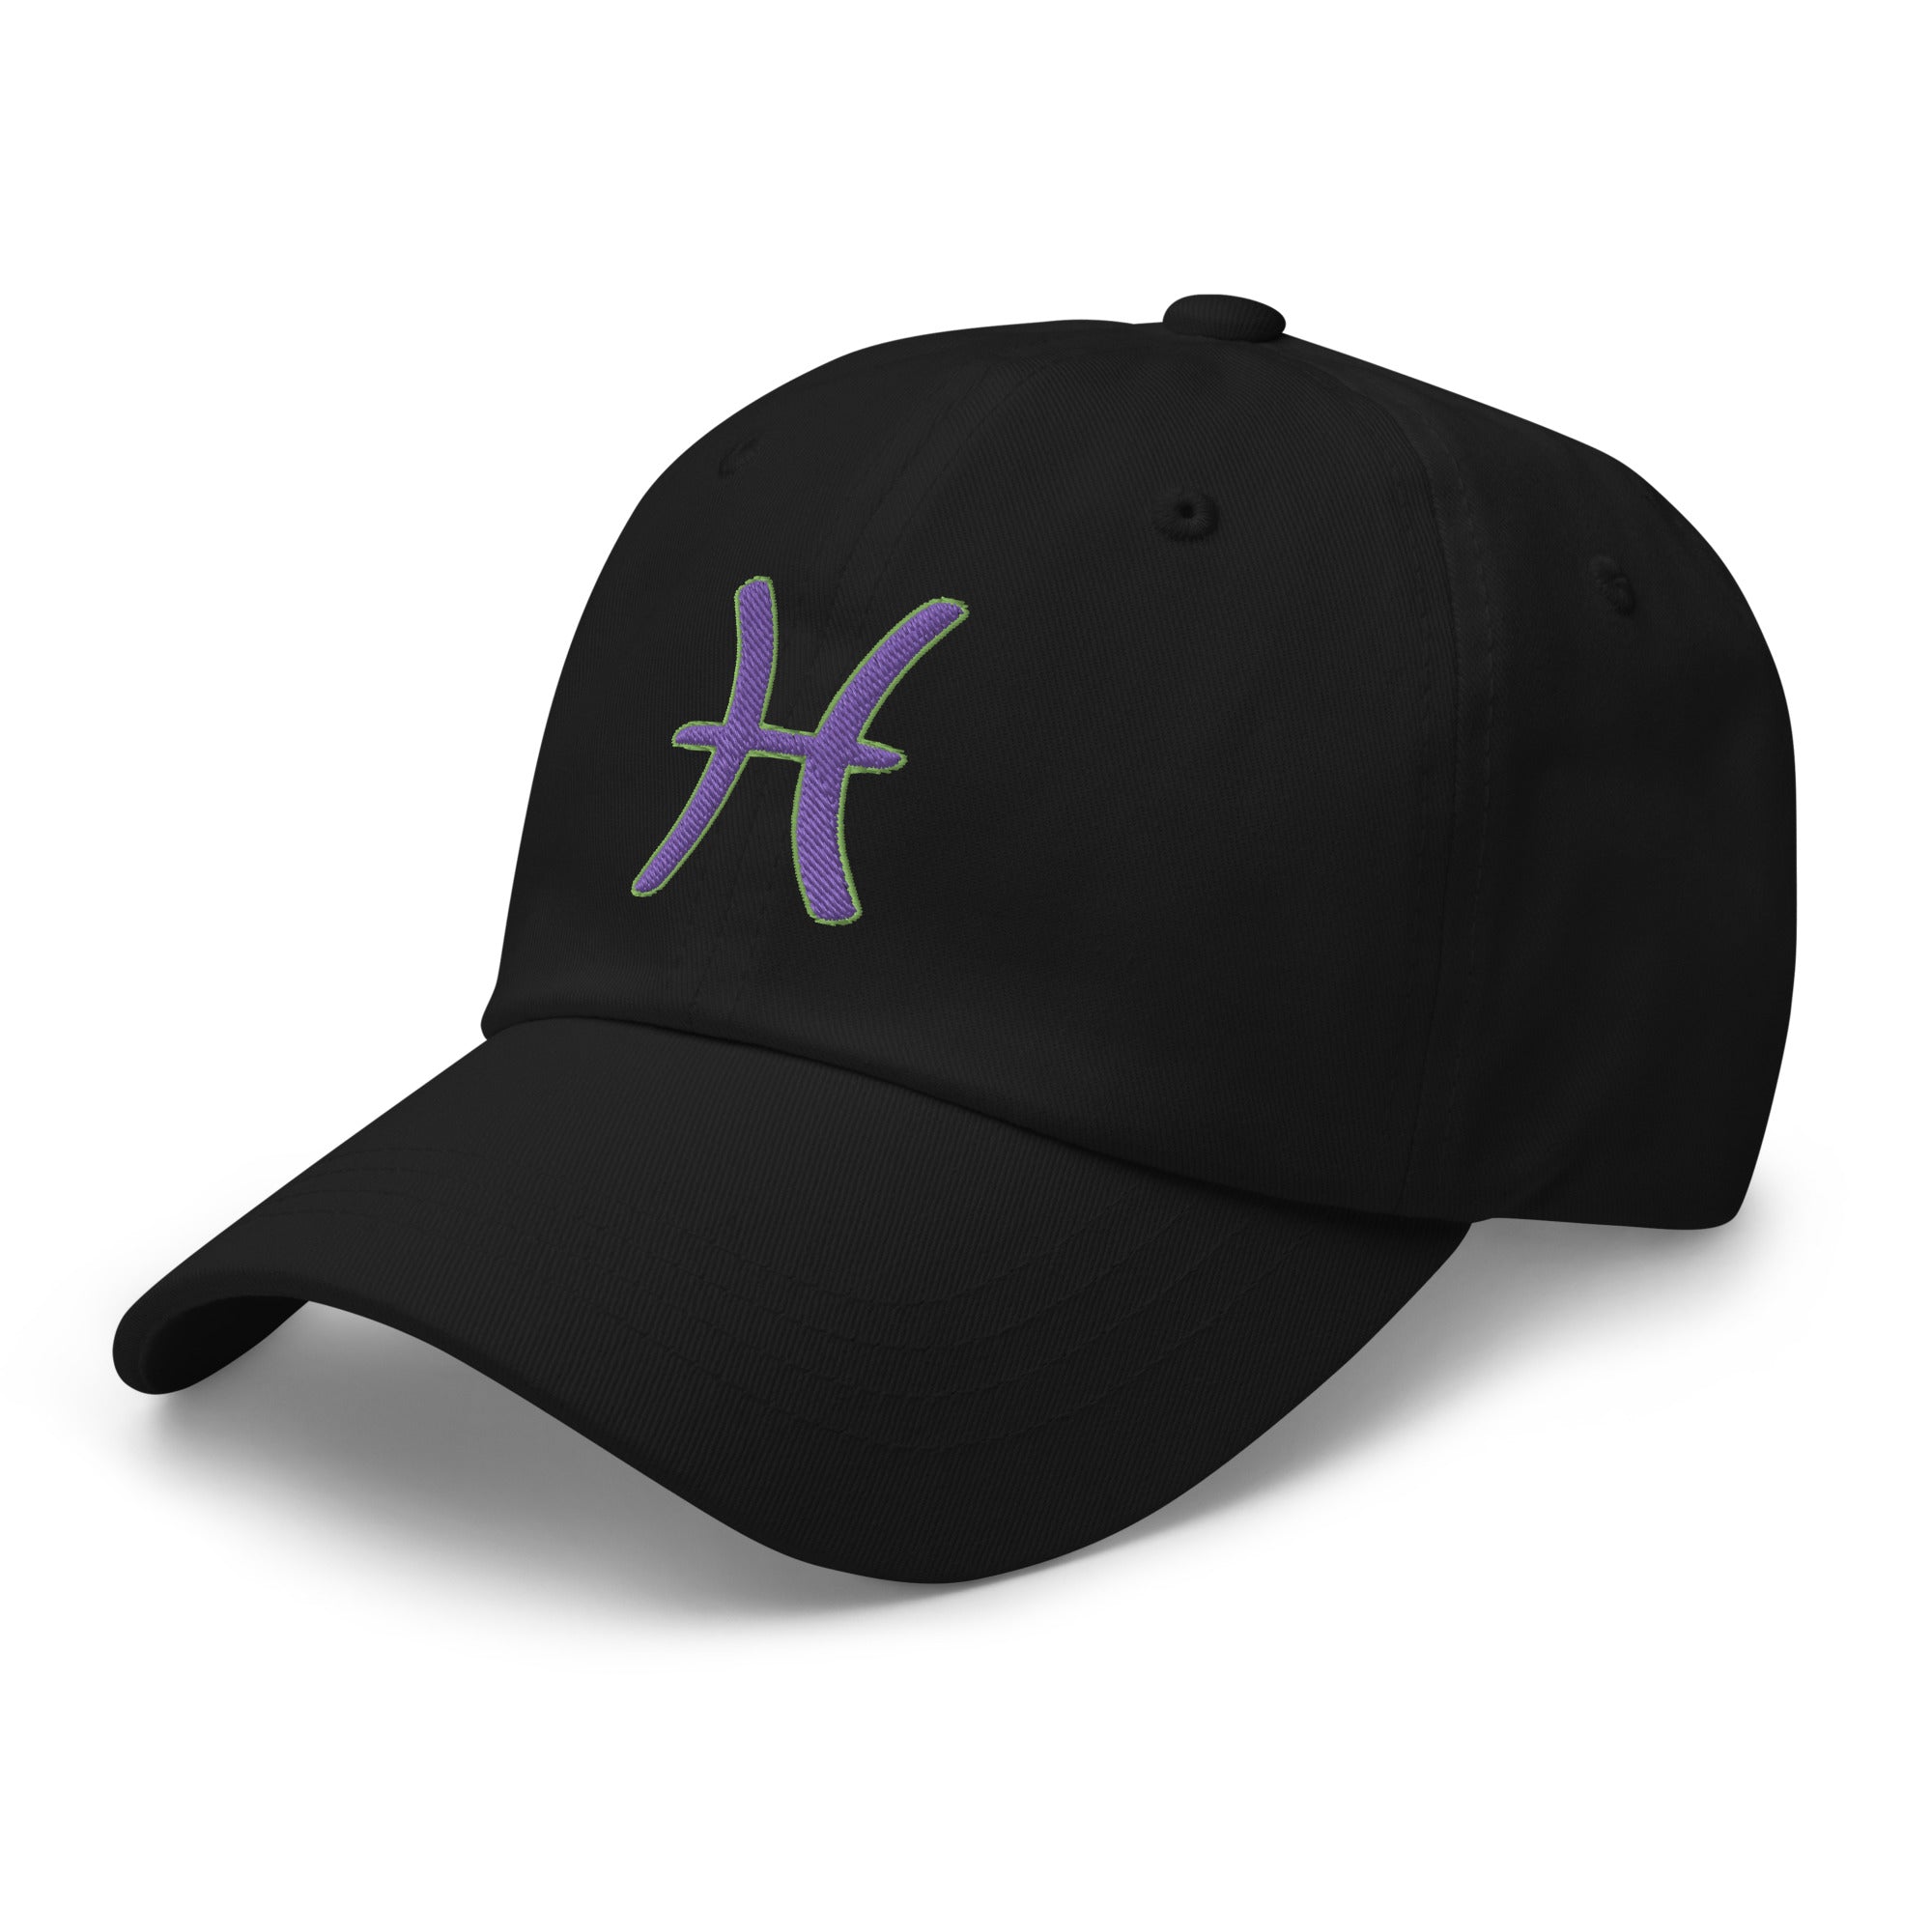 Zodiac Sign Pisces Embroidered Baseball Cap Astrology Horoscope Dad hat - Edge of Life Designs